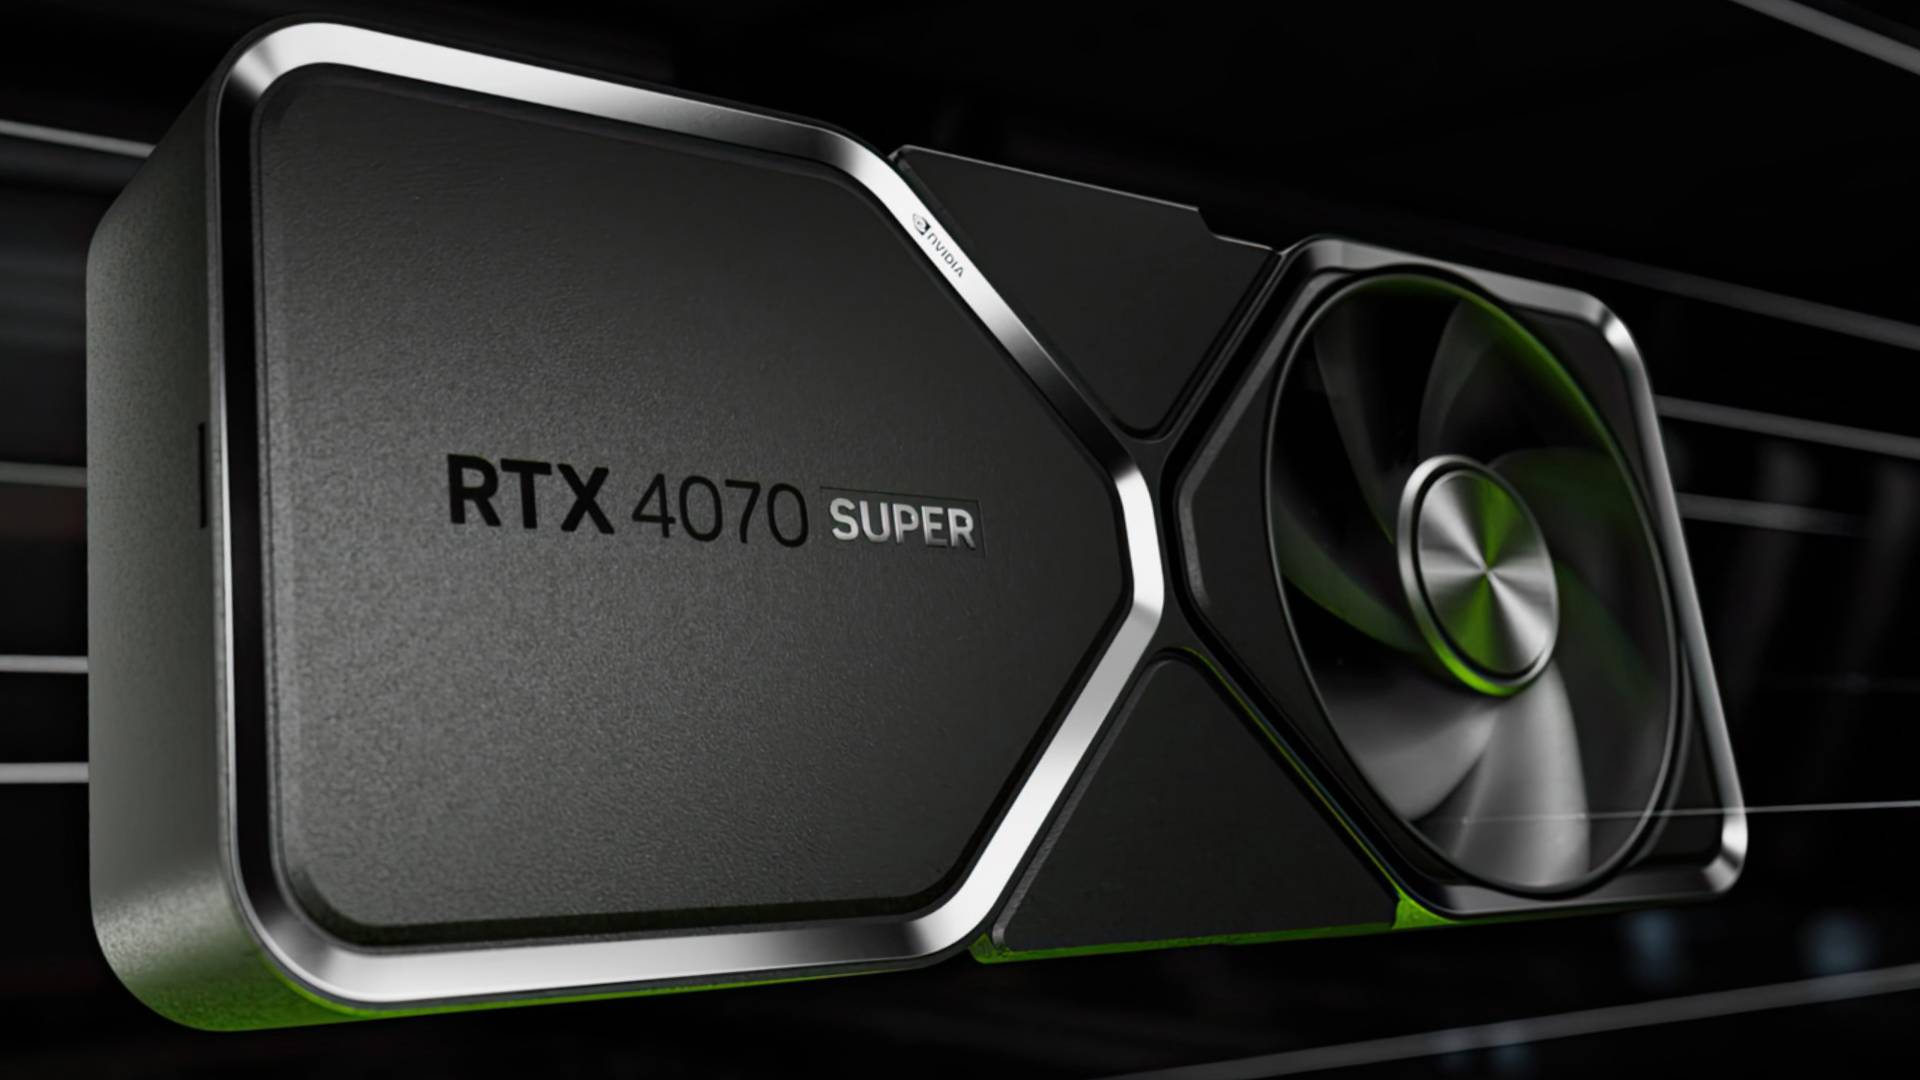 The Nvidia GeForce RTX 4070 Super has landed, but getting one could be a  chore